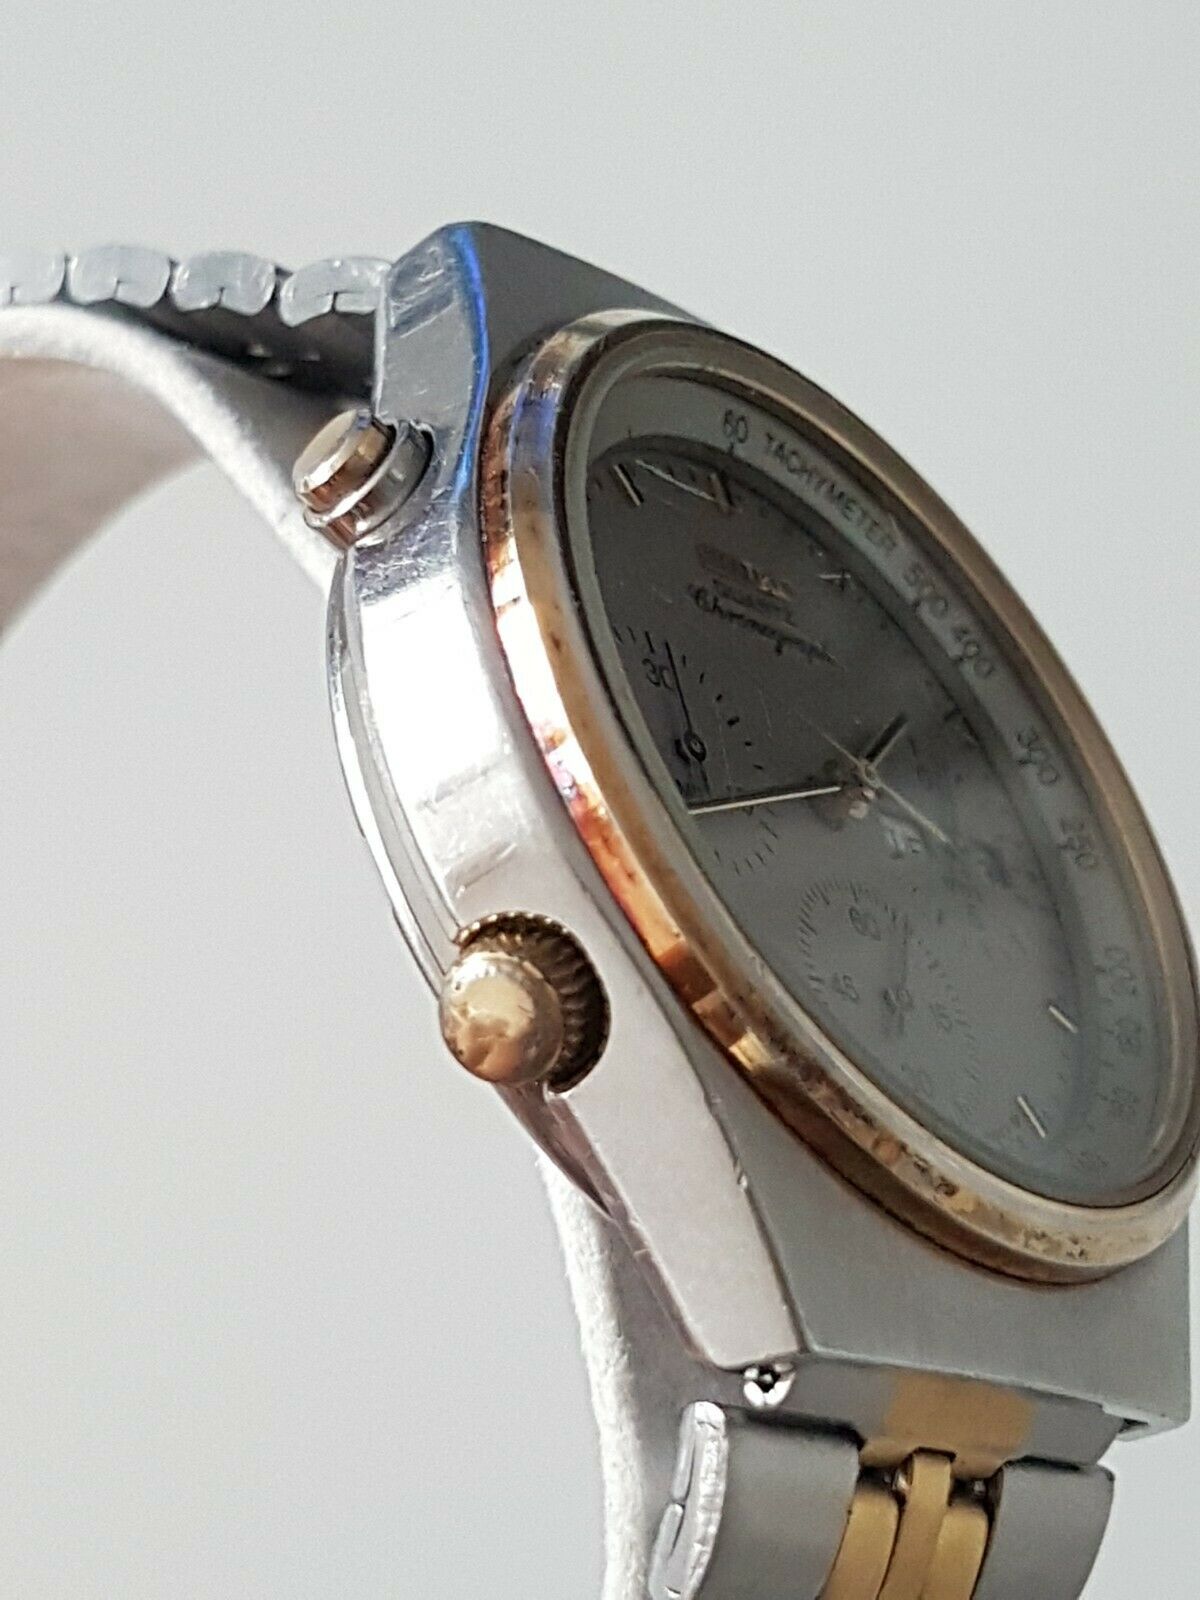 7A38-727A-Stainless+Gold-GreyFace-eBay(Germany)-Feb2021-(Re-seller)-3.jpg